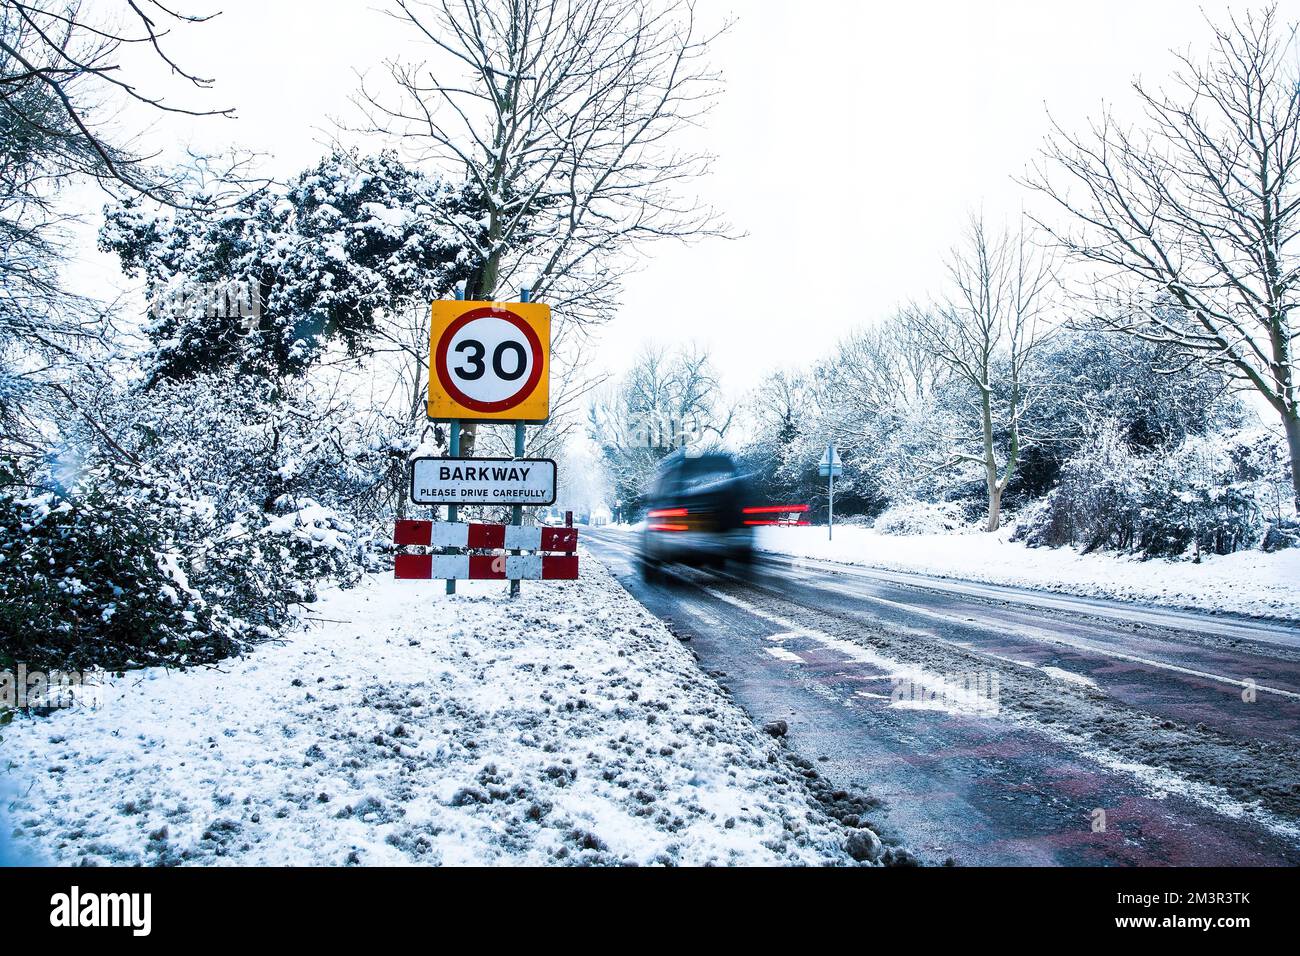 Snow in outskirts of Barkway, England Stock Photo